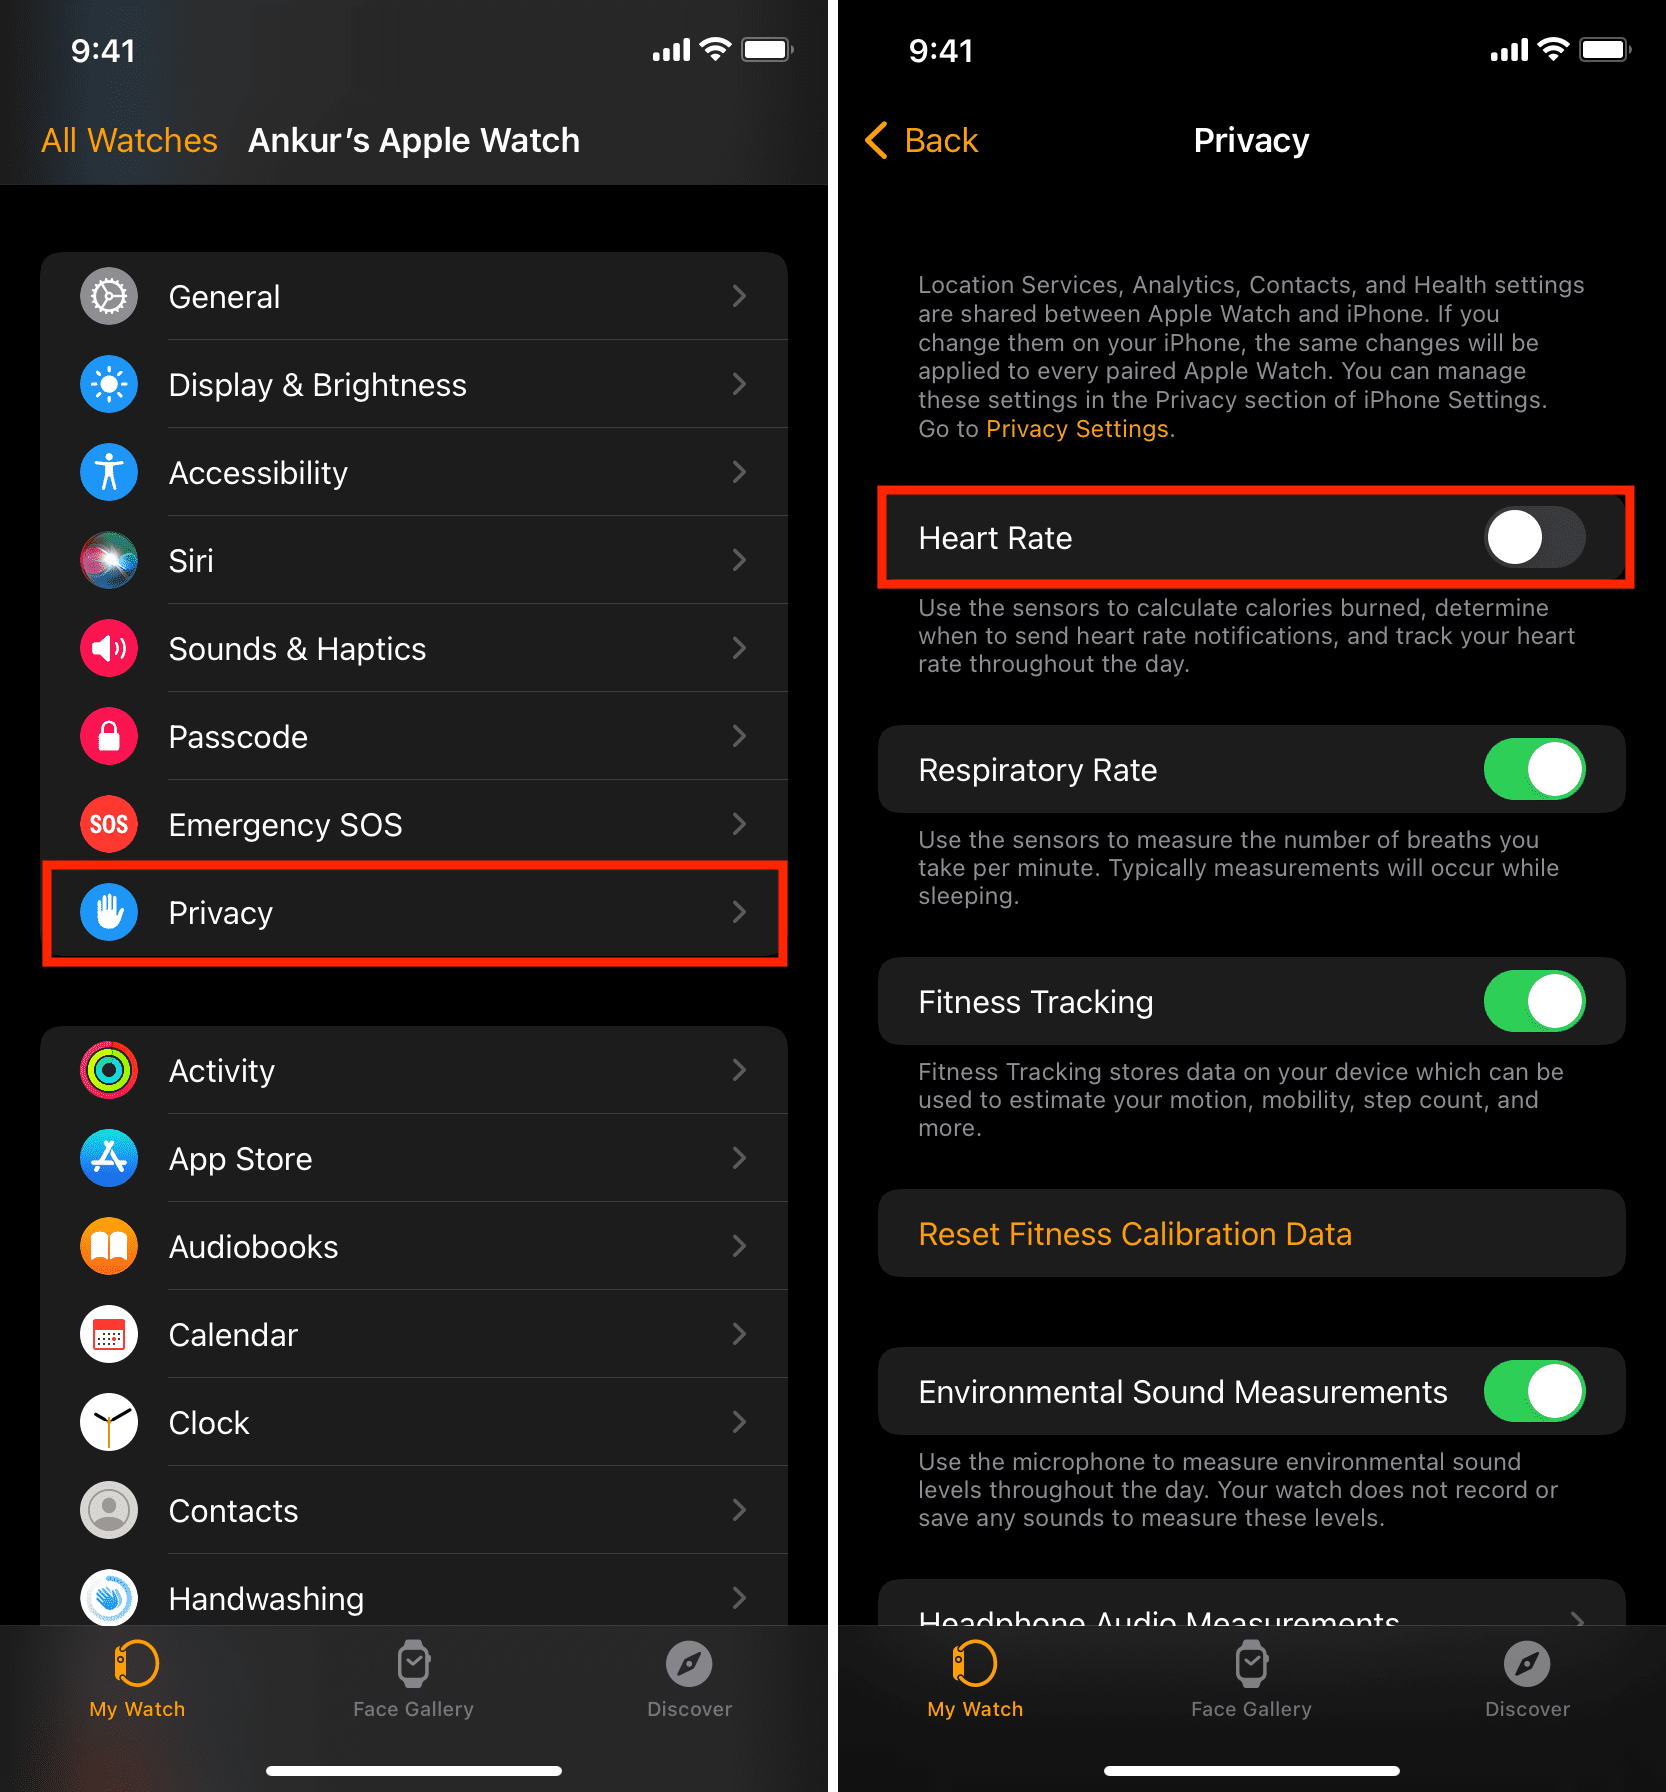 How to disable Heart Rate and the Apple Watch green light using iPhone Watch app